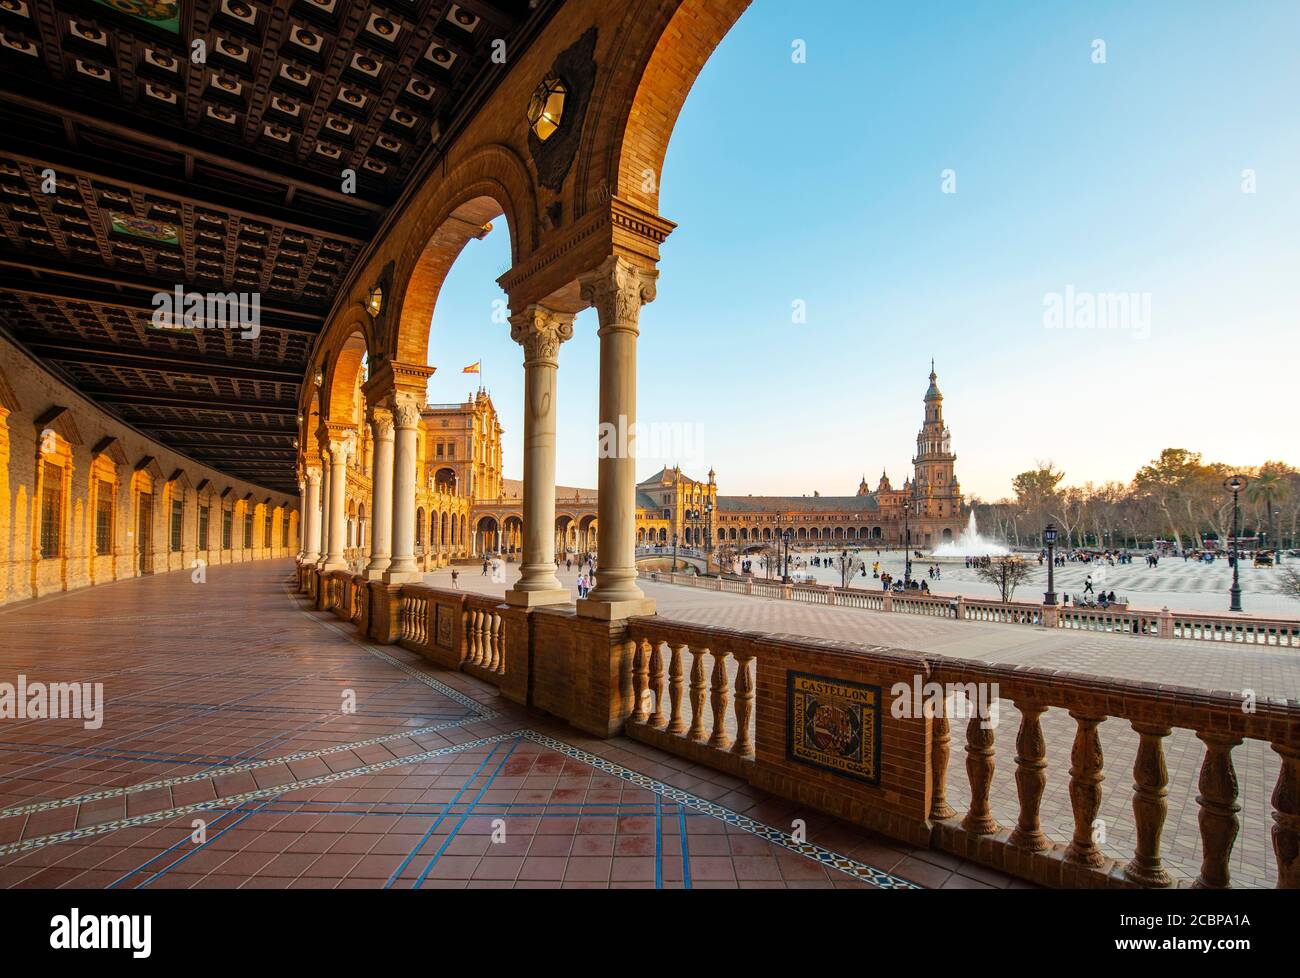 Plaza de Espana in the evening light, from the gallery, Sevilla, Andalusia, Spain Stock Photo